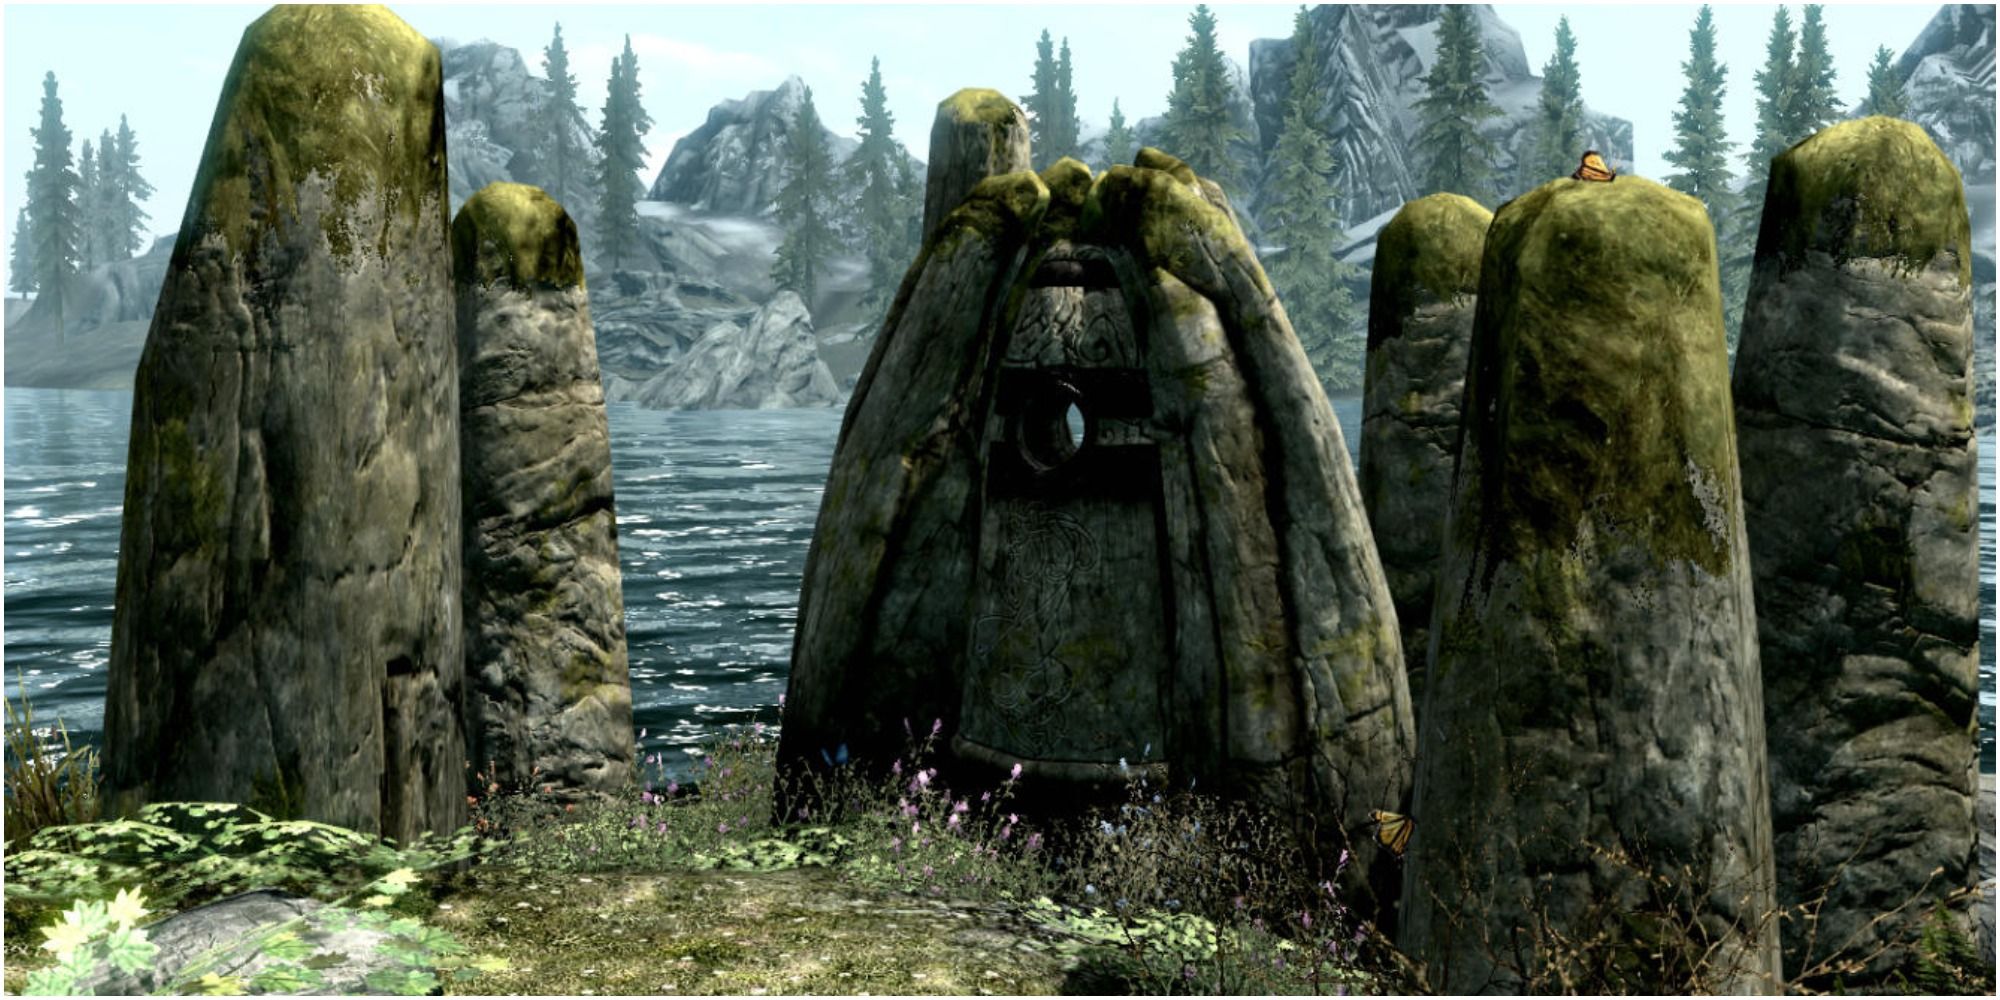 The Lady Standing Stone in Skyrim